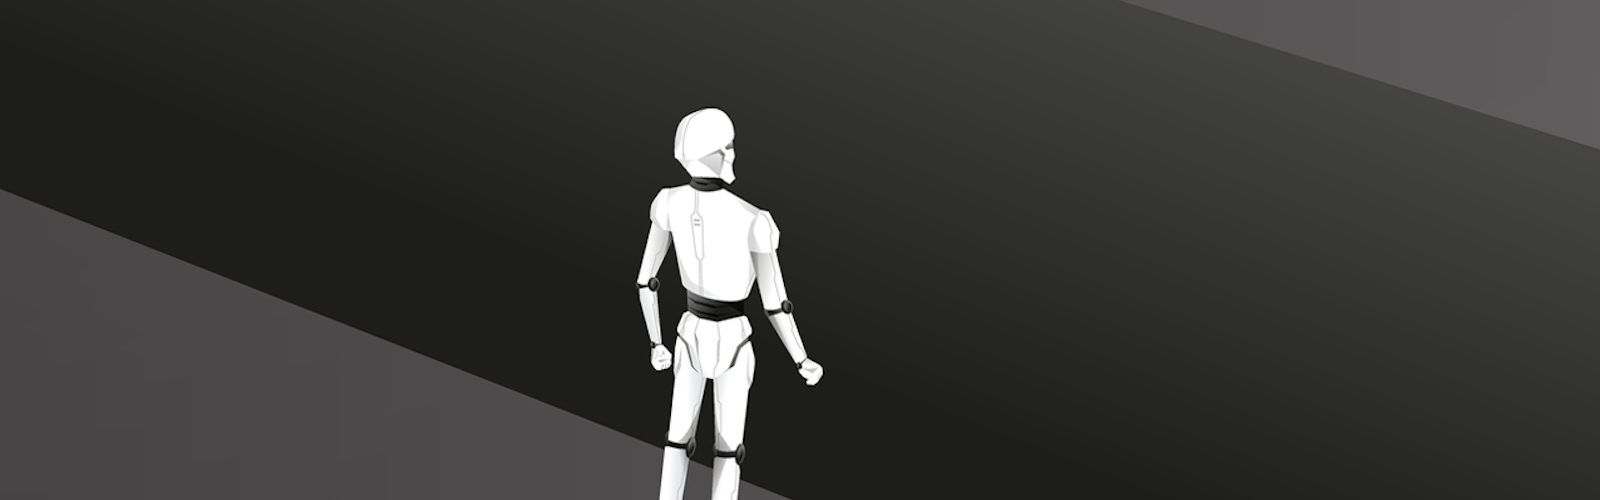 White human-shaped robot playing a game of chess Vector Image